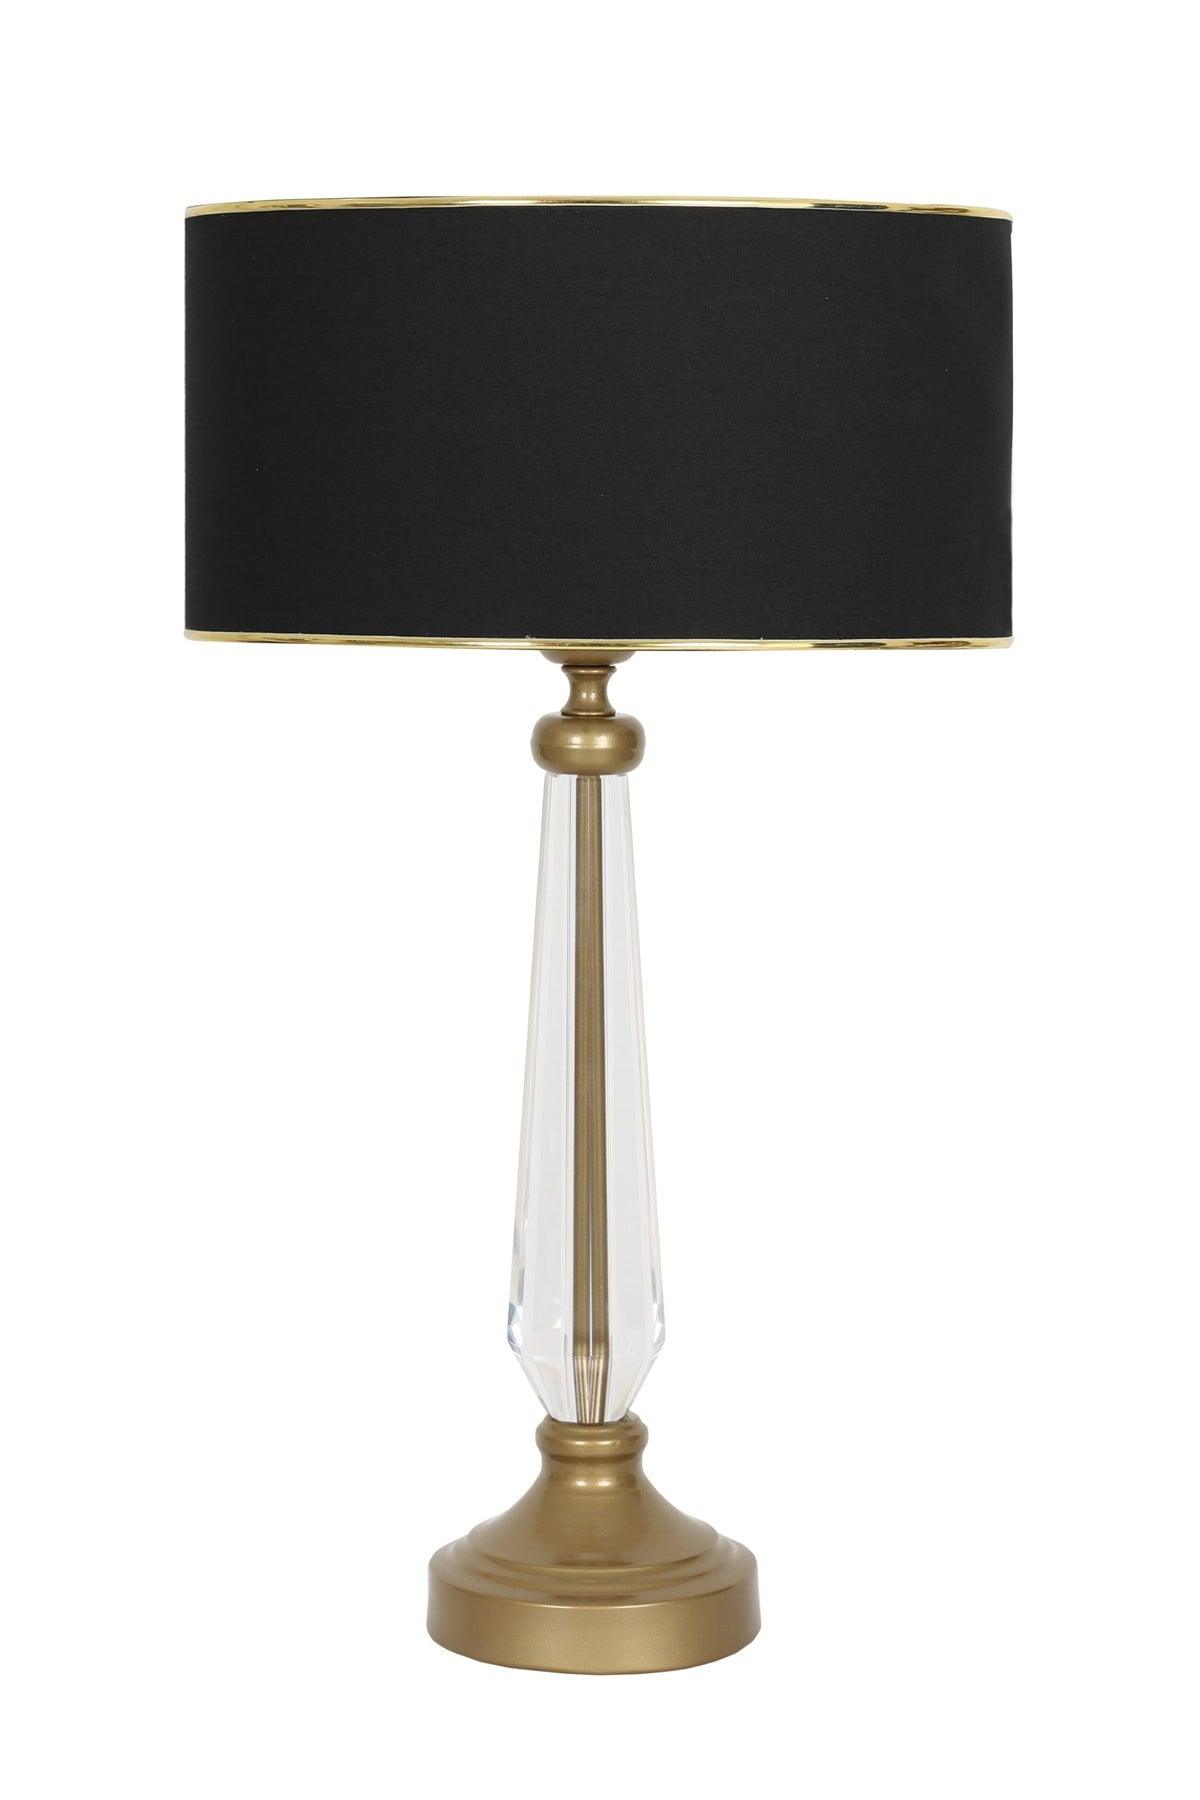 Gard Static Tumbled Vertical Crystal Lampshade - Black with Gold Stripe - Swordslife